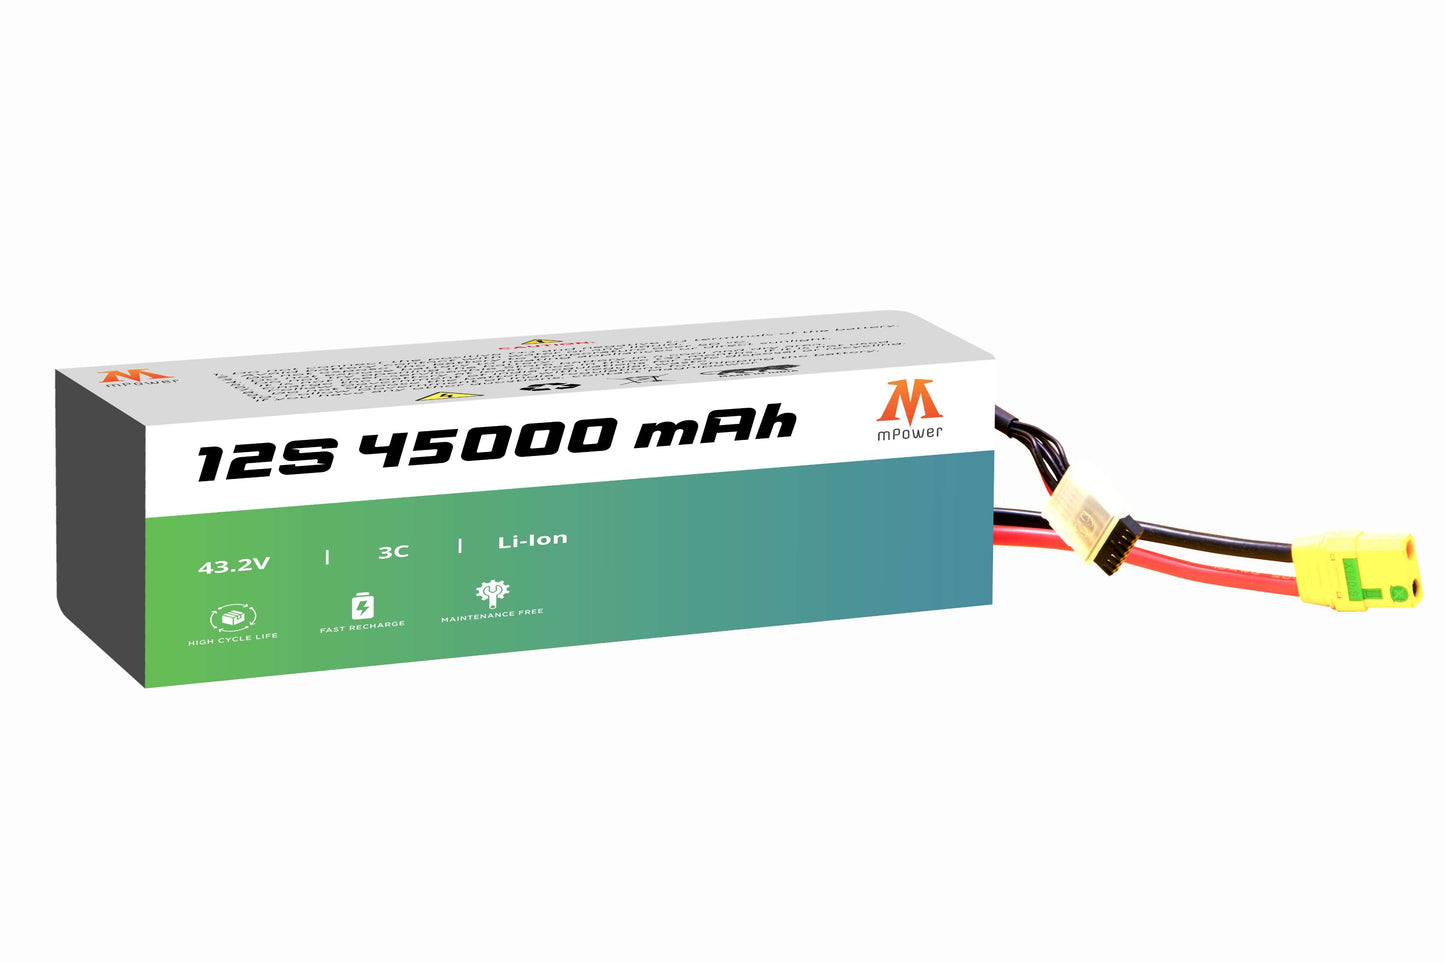 mPower 12S 45000mAh Lithium-Ion Battery for Delivery Drones-mpowerlithium